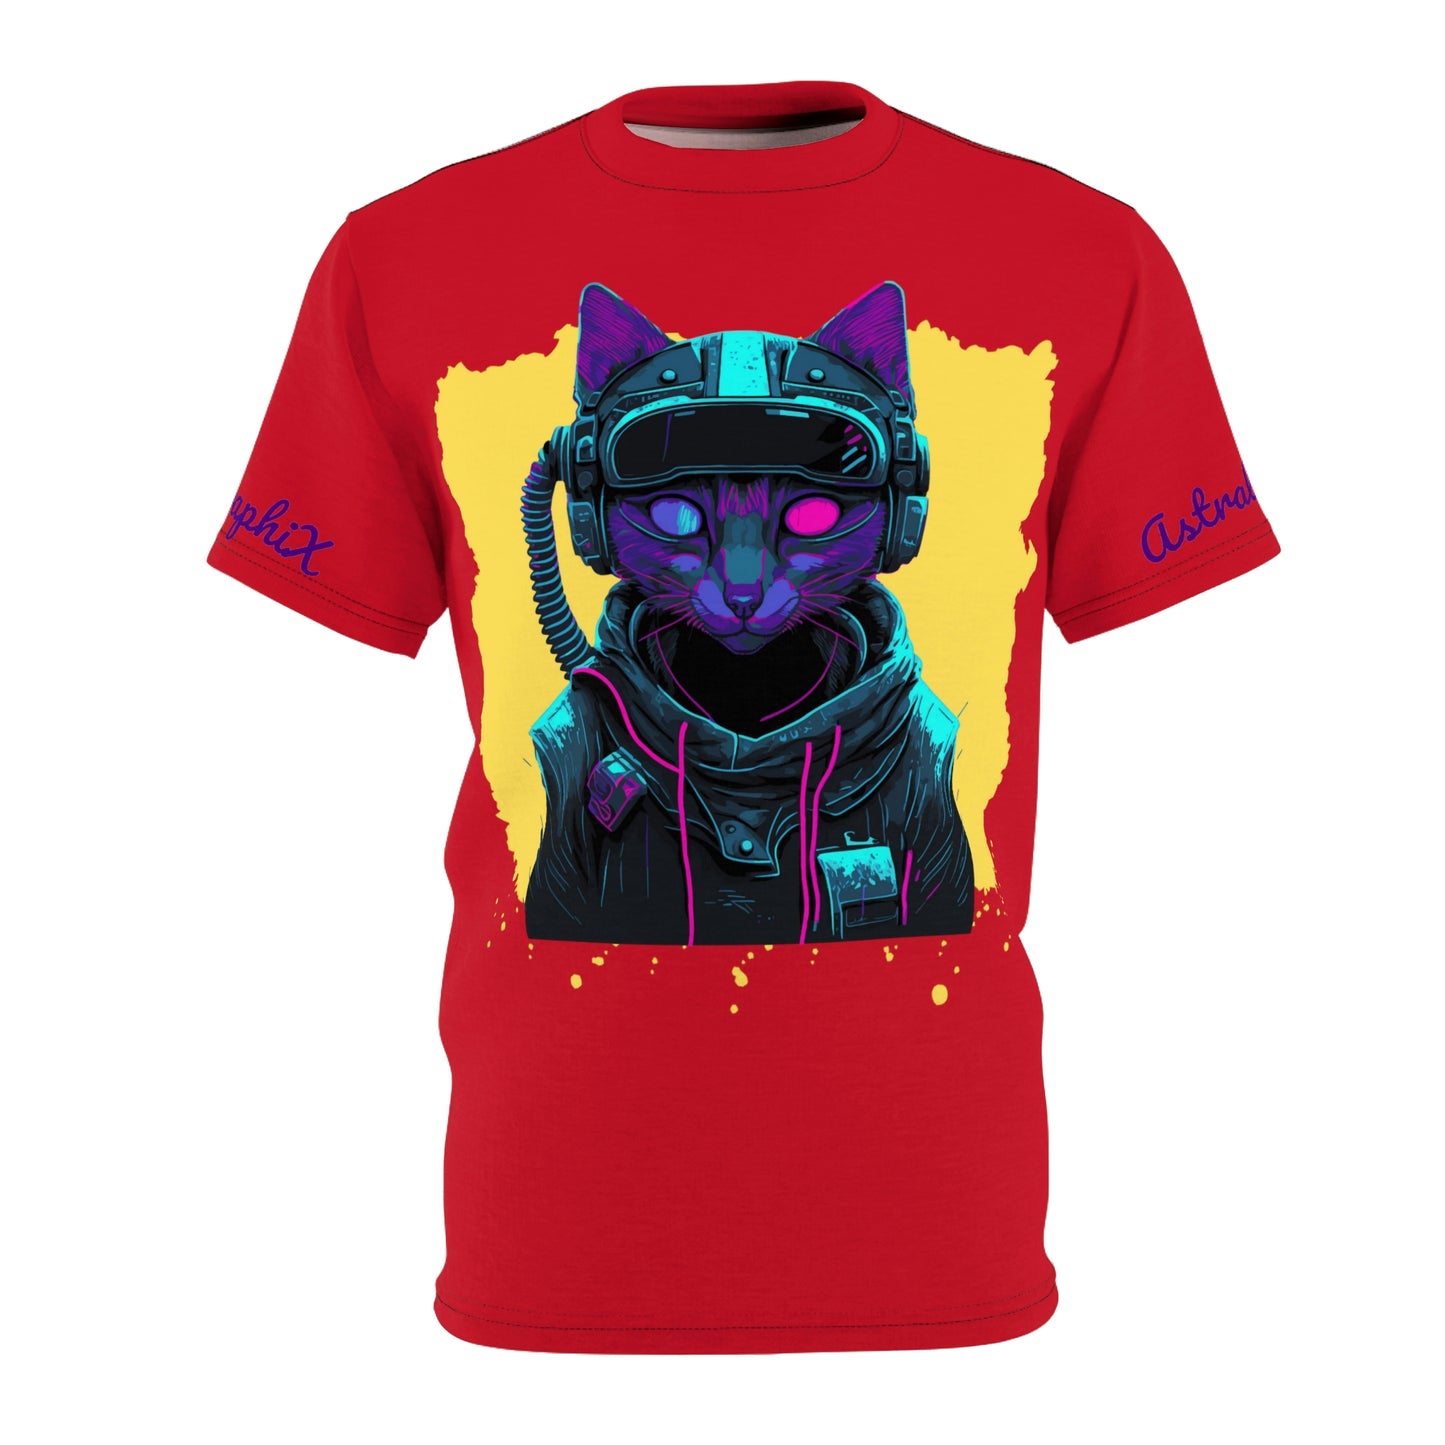 Cyber Punk Collection - Unisex AOP Cut & Sew Tee - Cyber Kitty v1 in Red